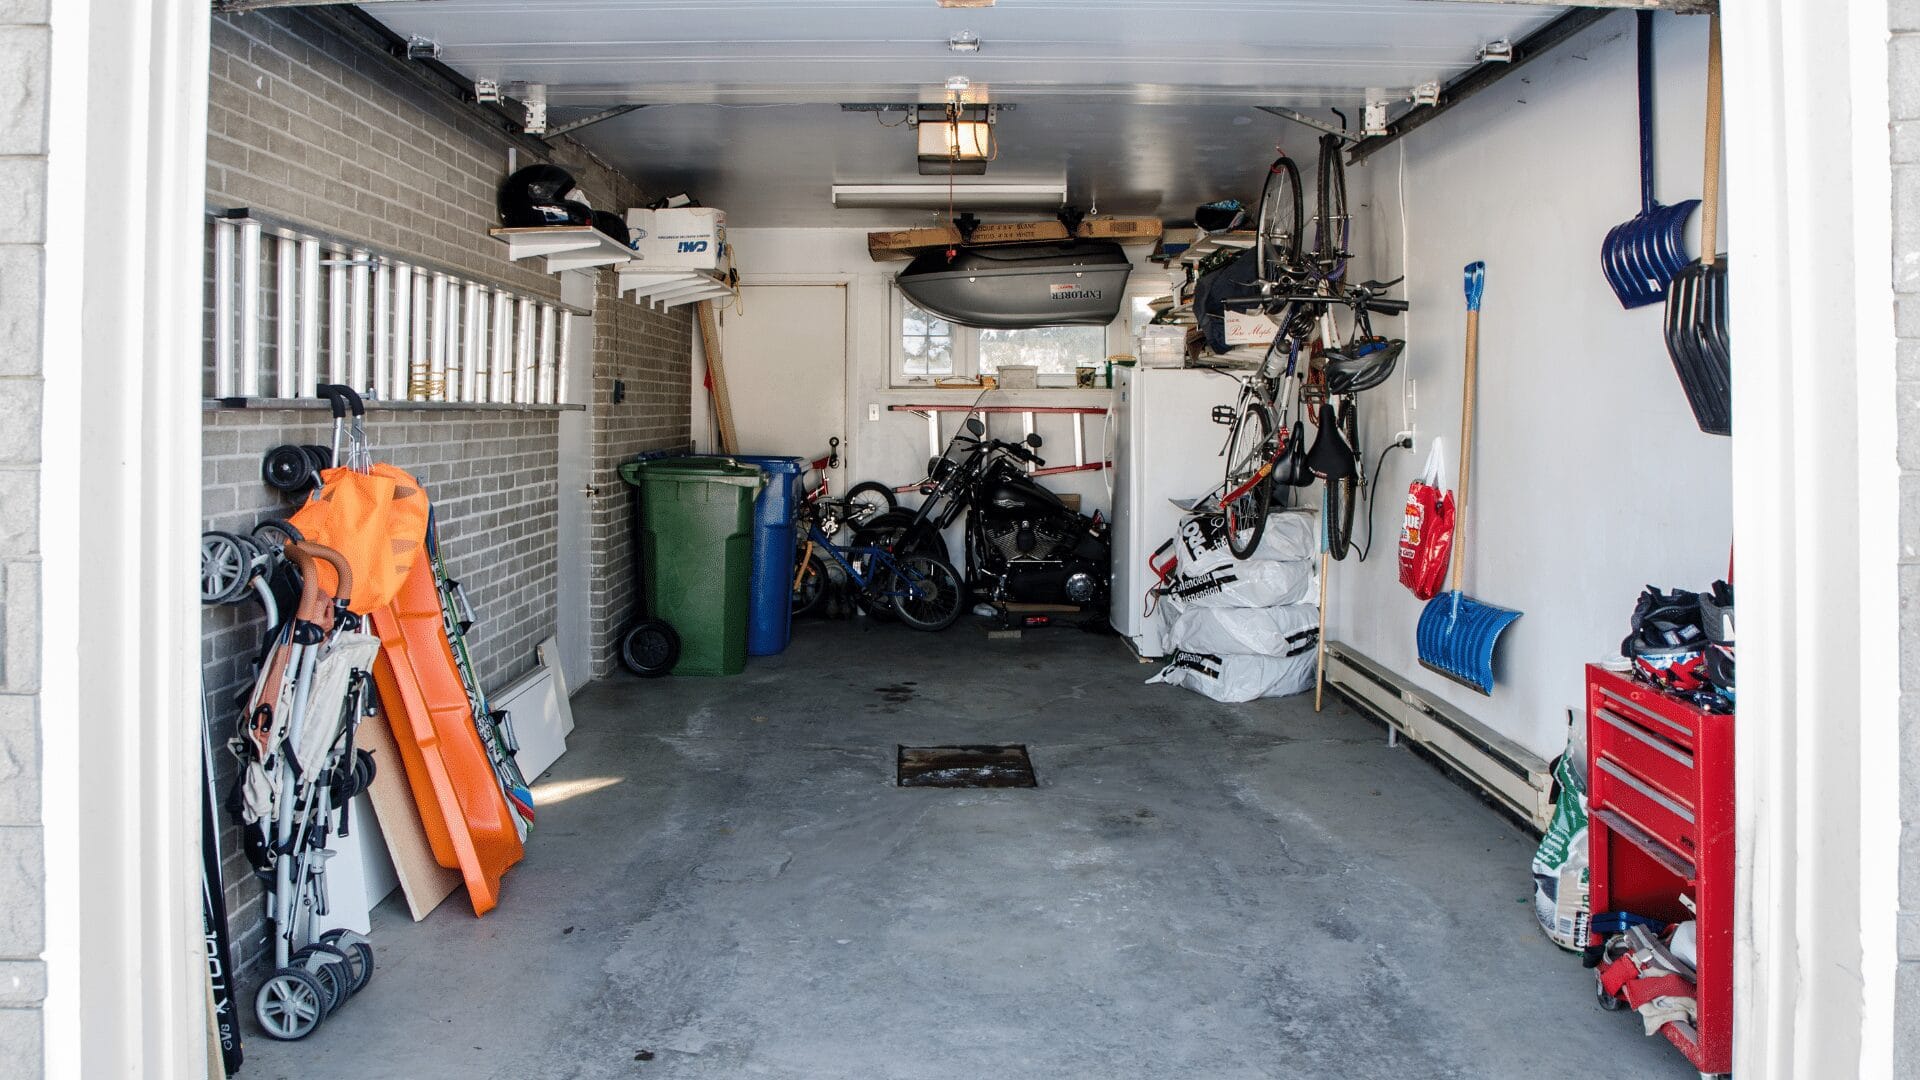 small garage with normal things like a trash can, fridge, and other storage